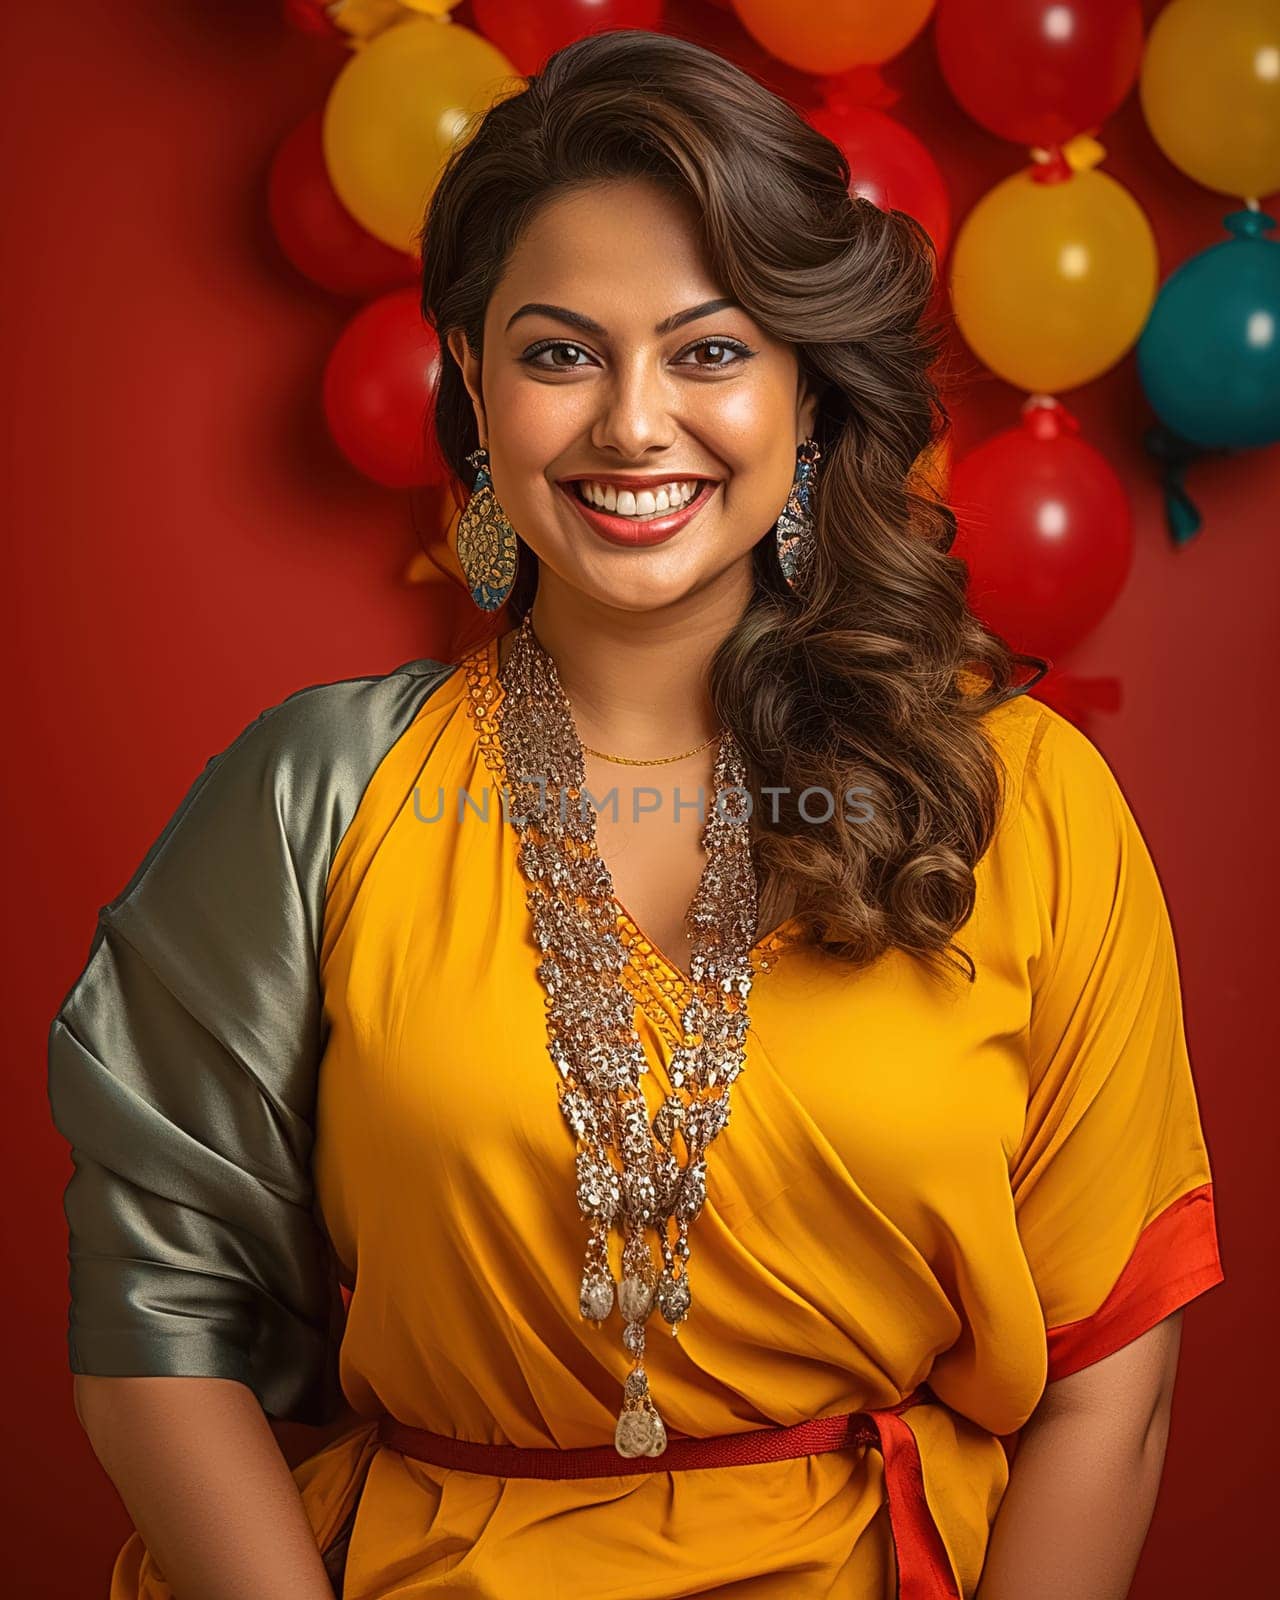 Portrait of Indian woman in yellow sari with jewelry